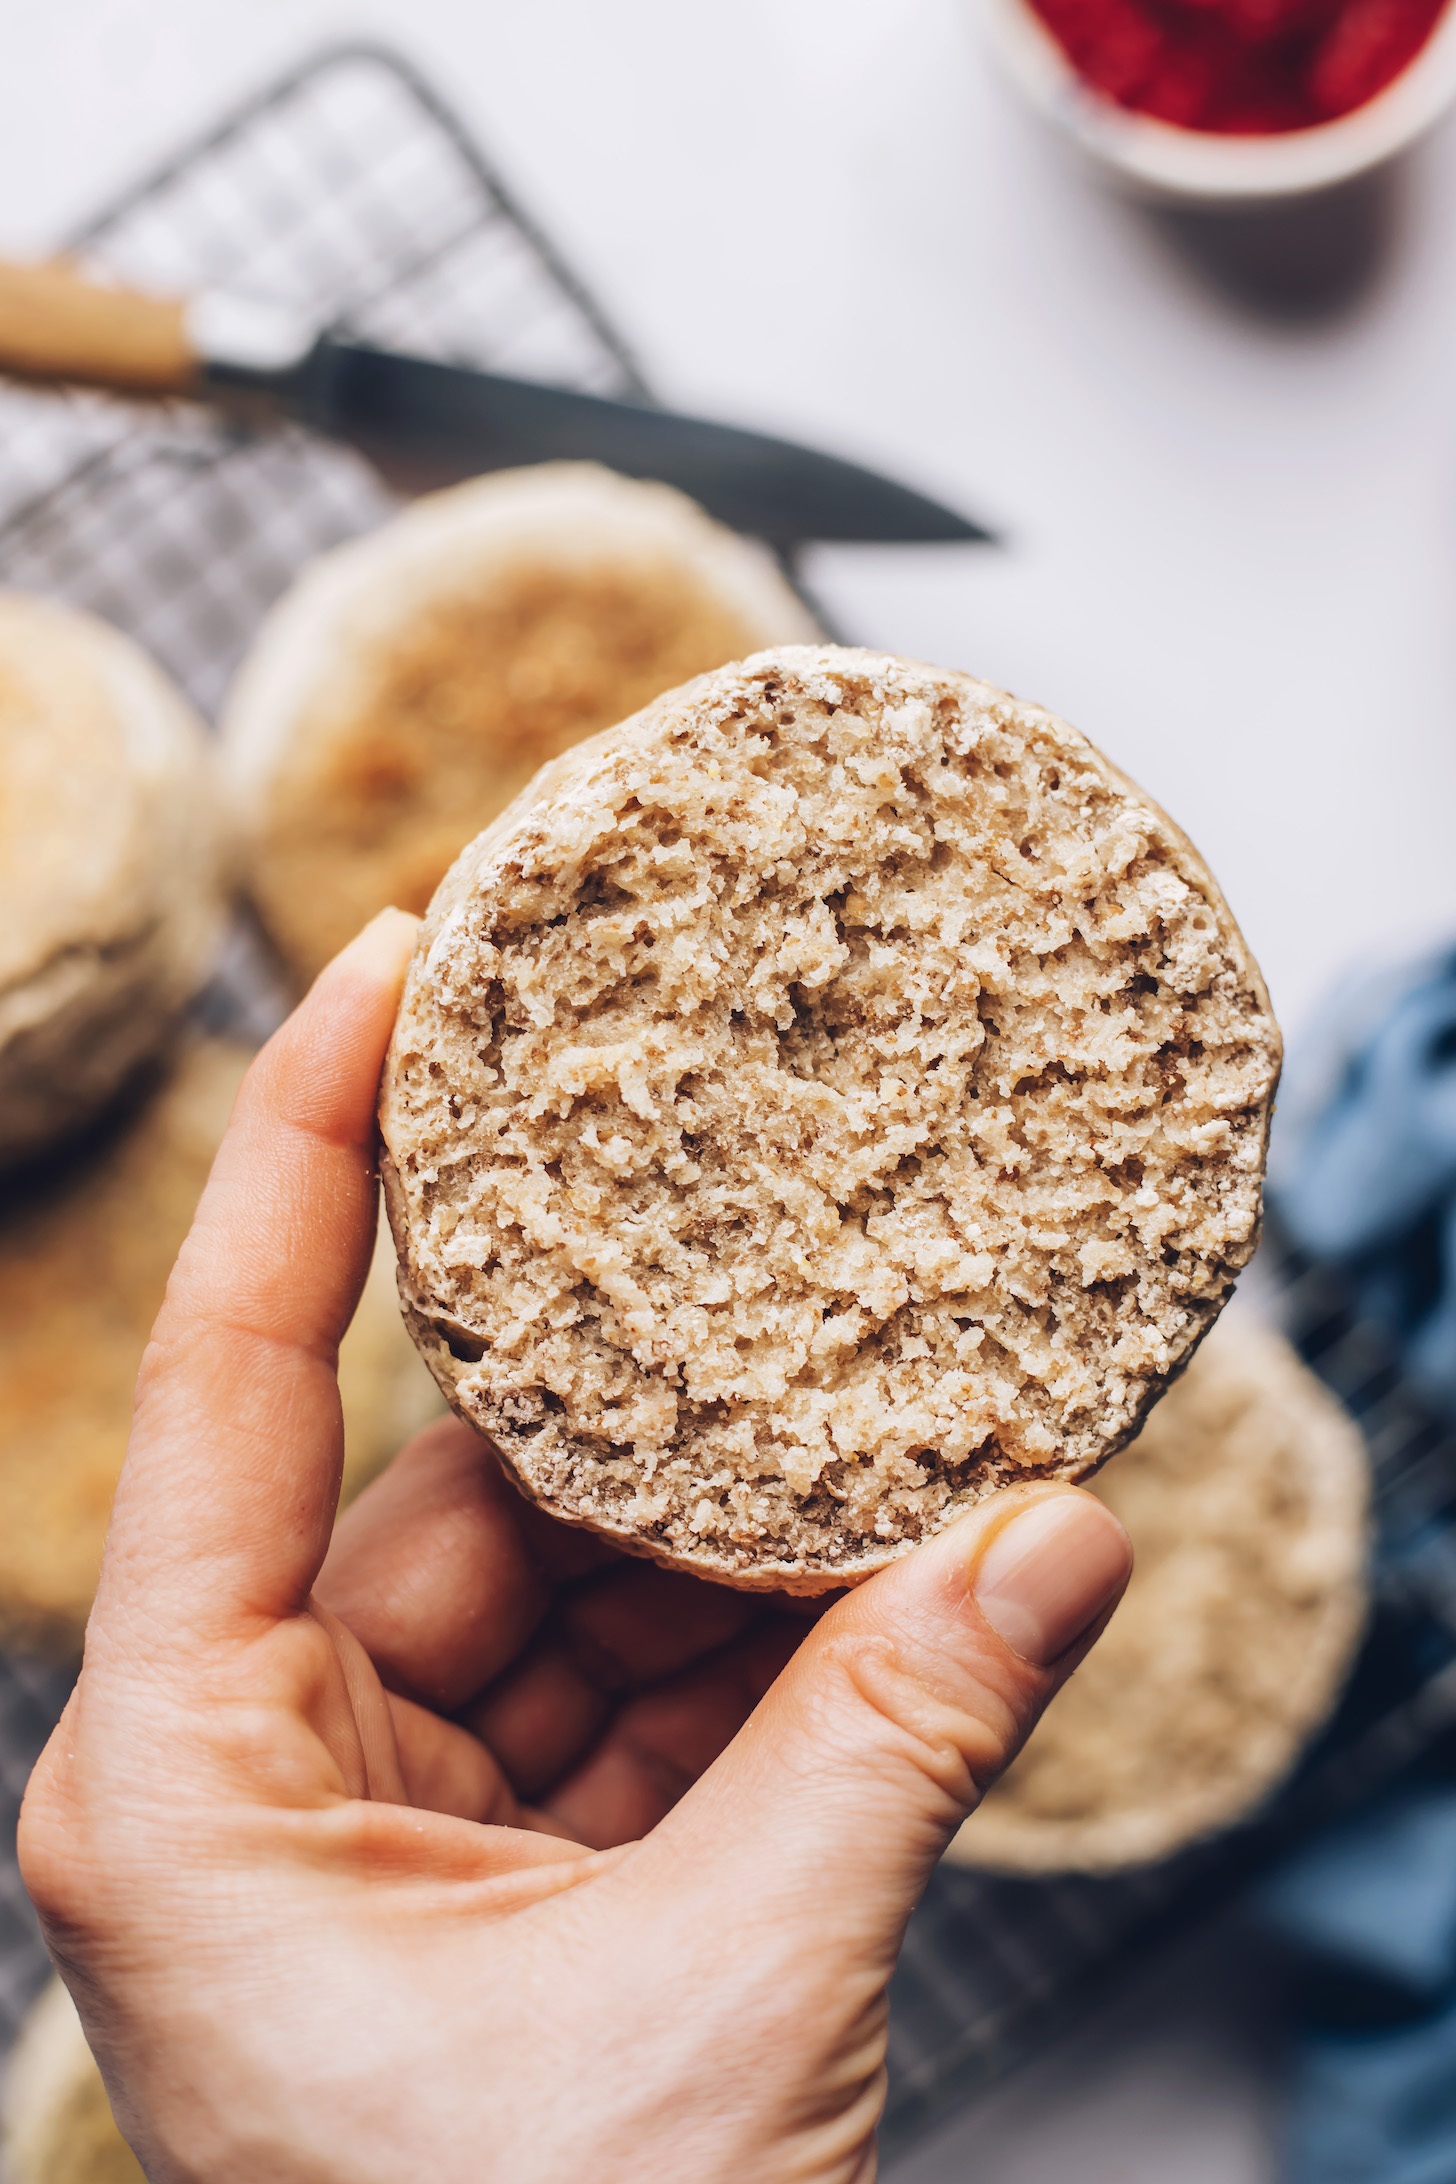 Showing the inside of a homemade gluten-free English muffin